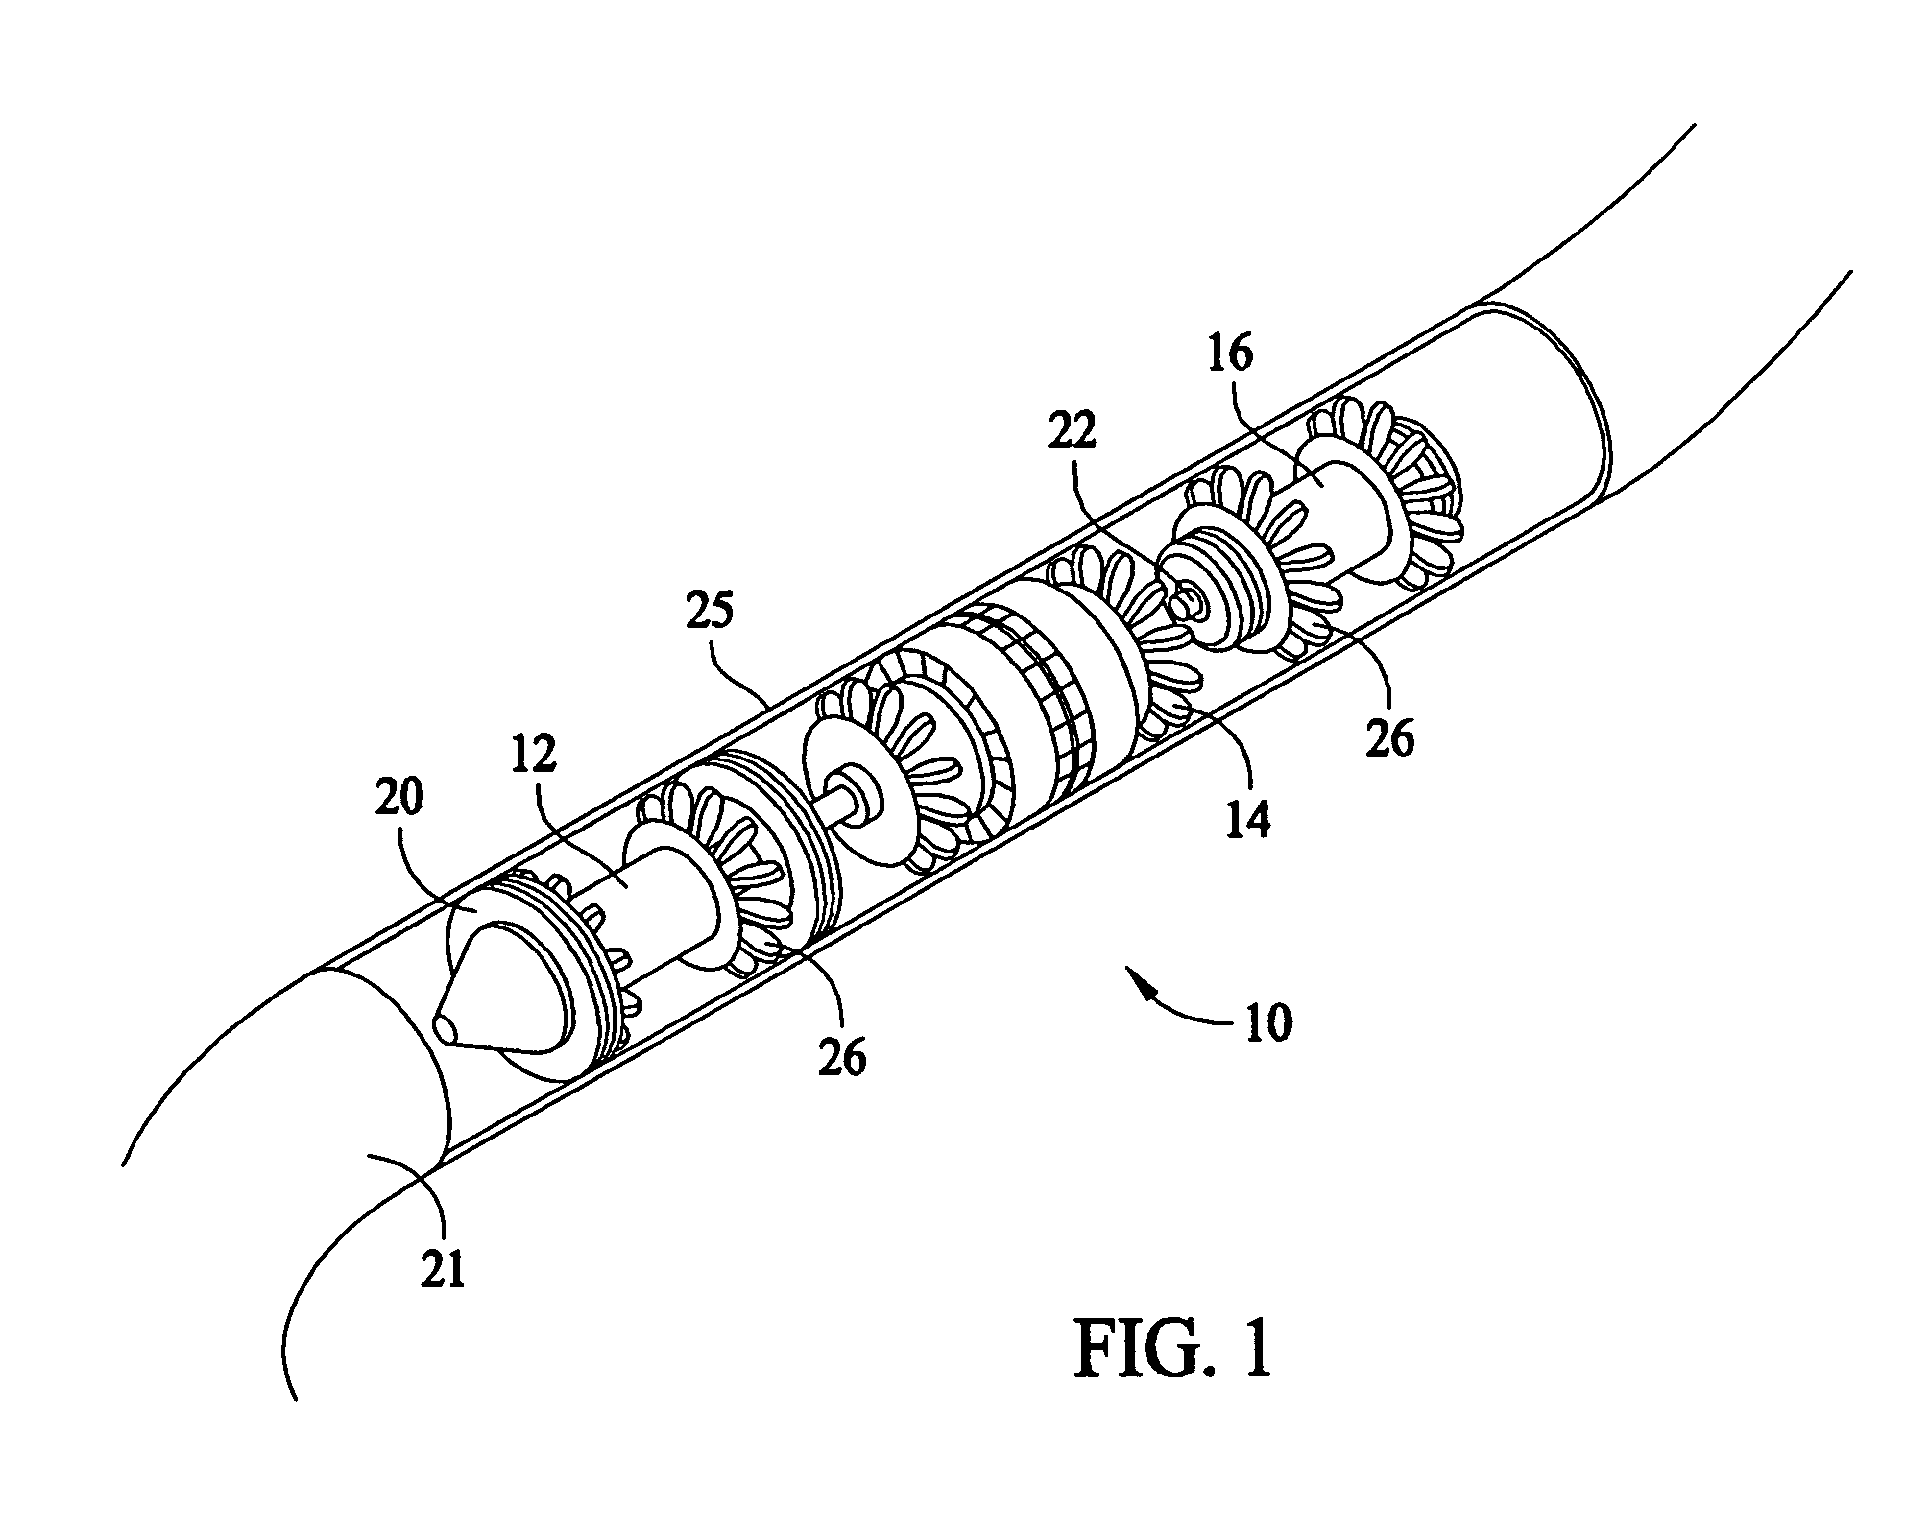 Abrasion-resistant pig, and materials and methods for making same